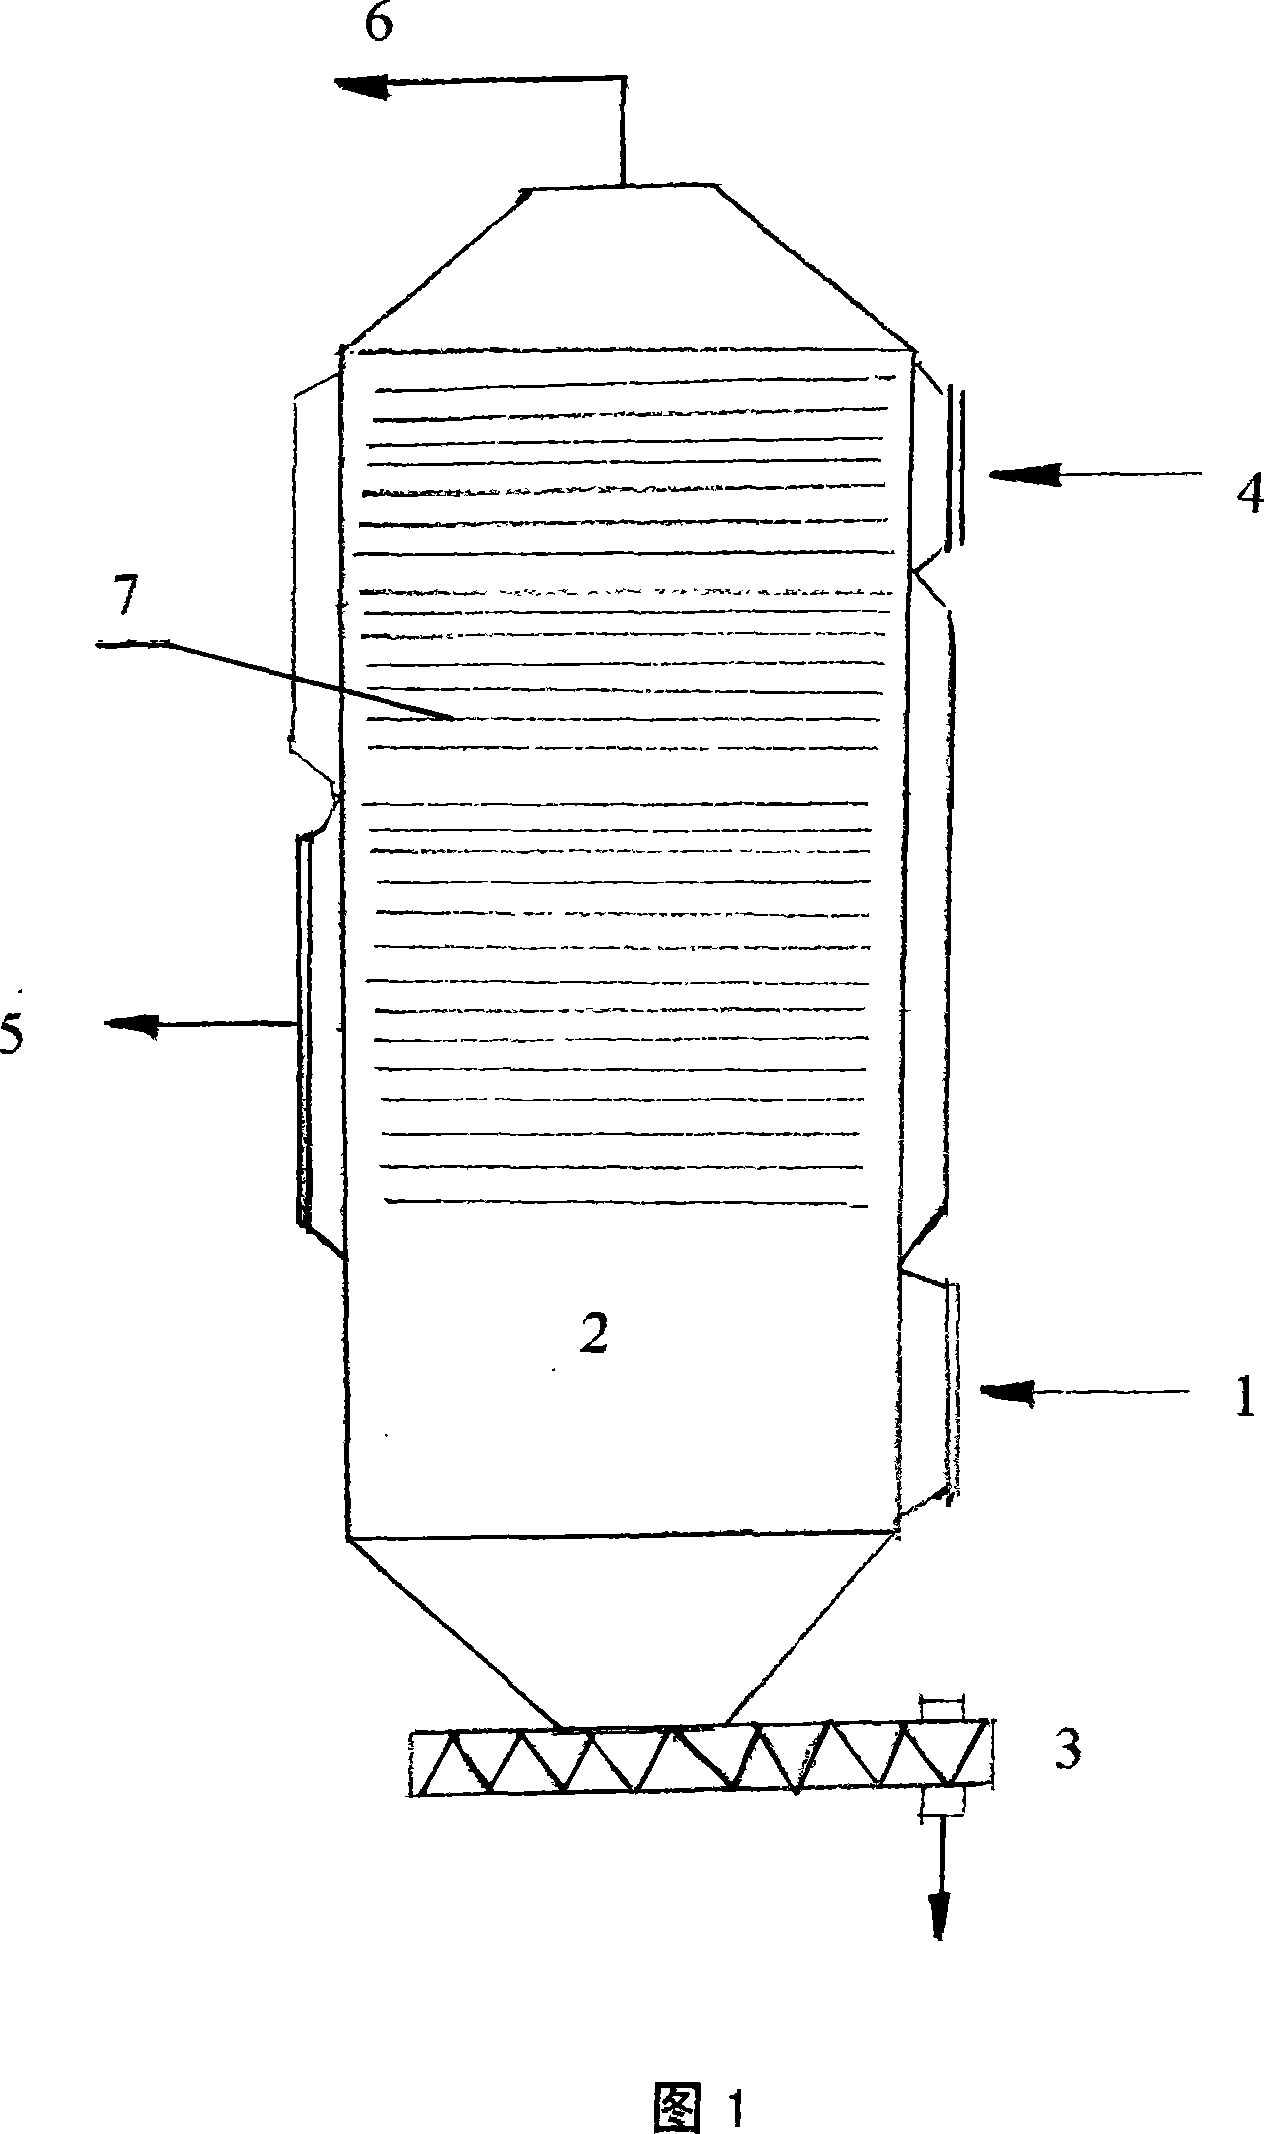 Method for converting to hot air from flue gas in baking furnace